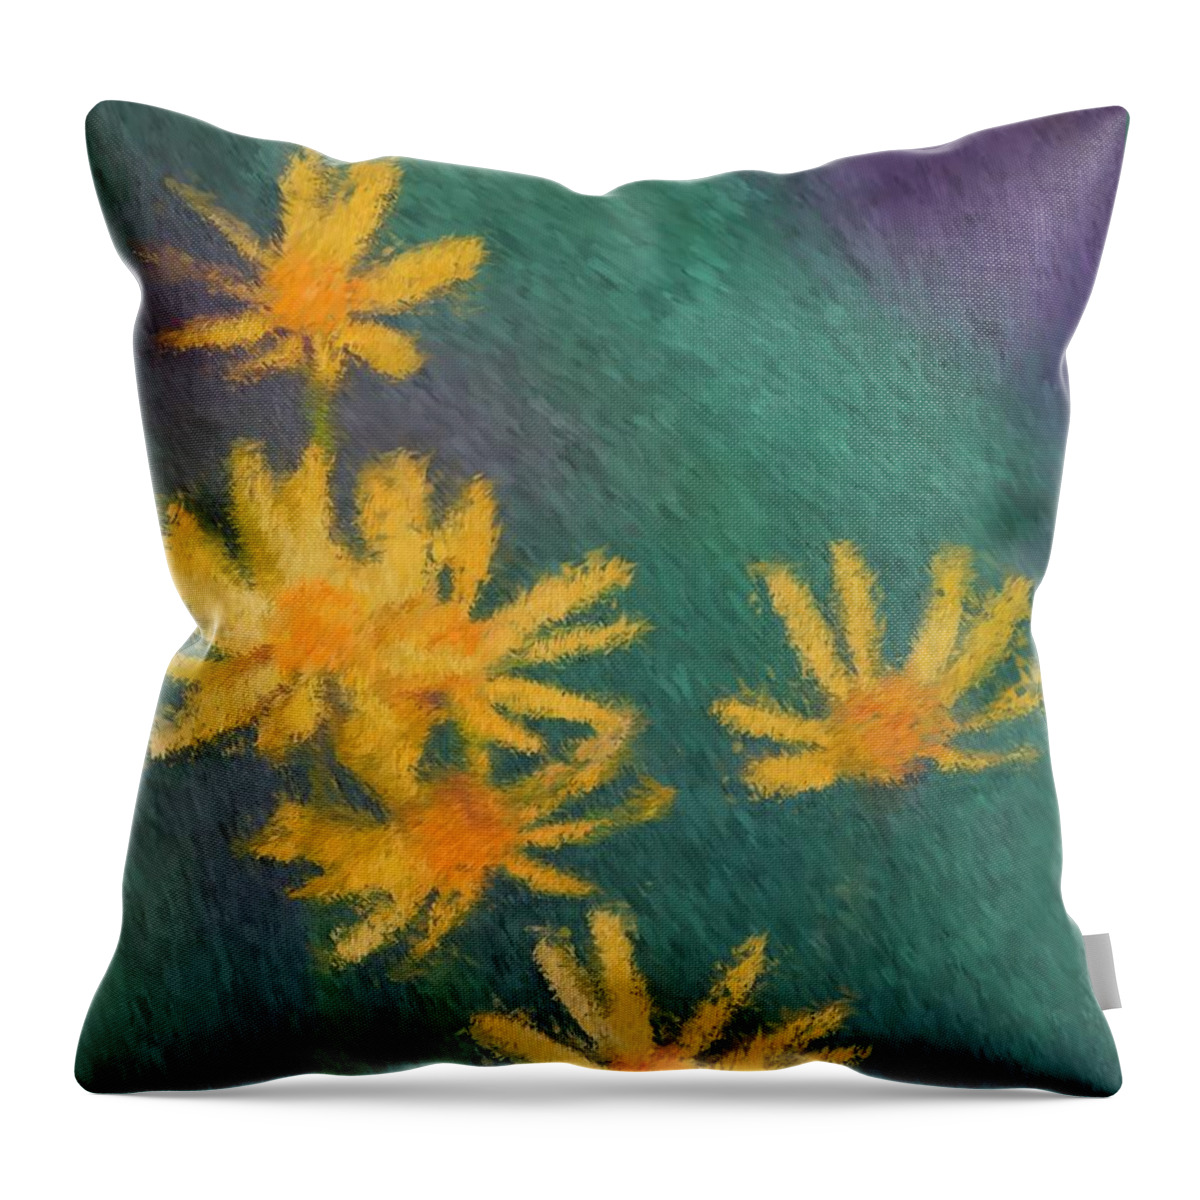 Flower Throw Pillow featuring the painting Yellow Wildflowers Floral Art by Smilin Eyes Treasures